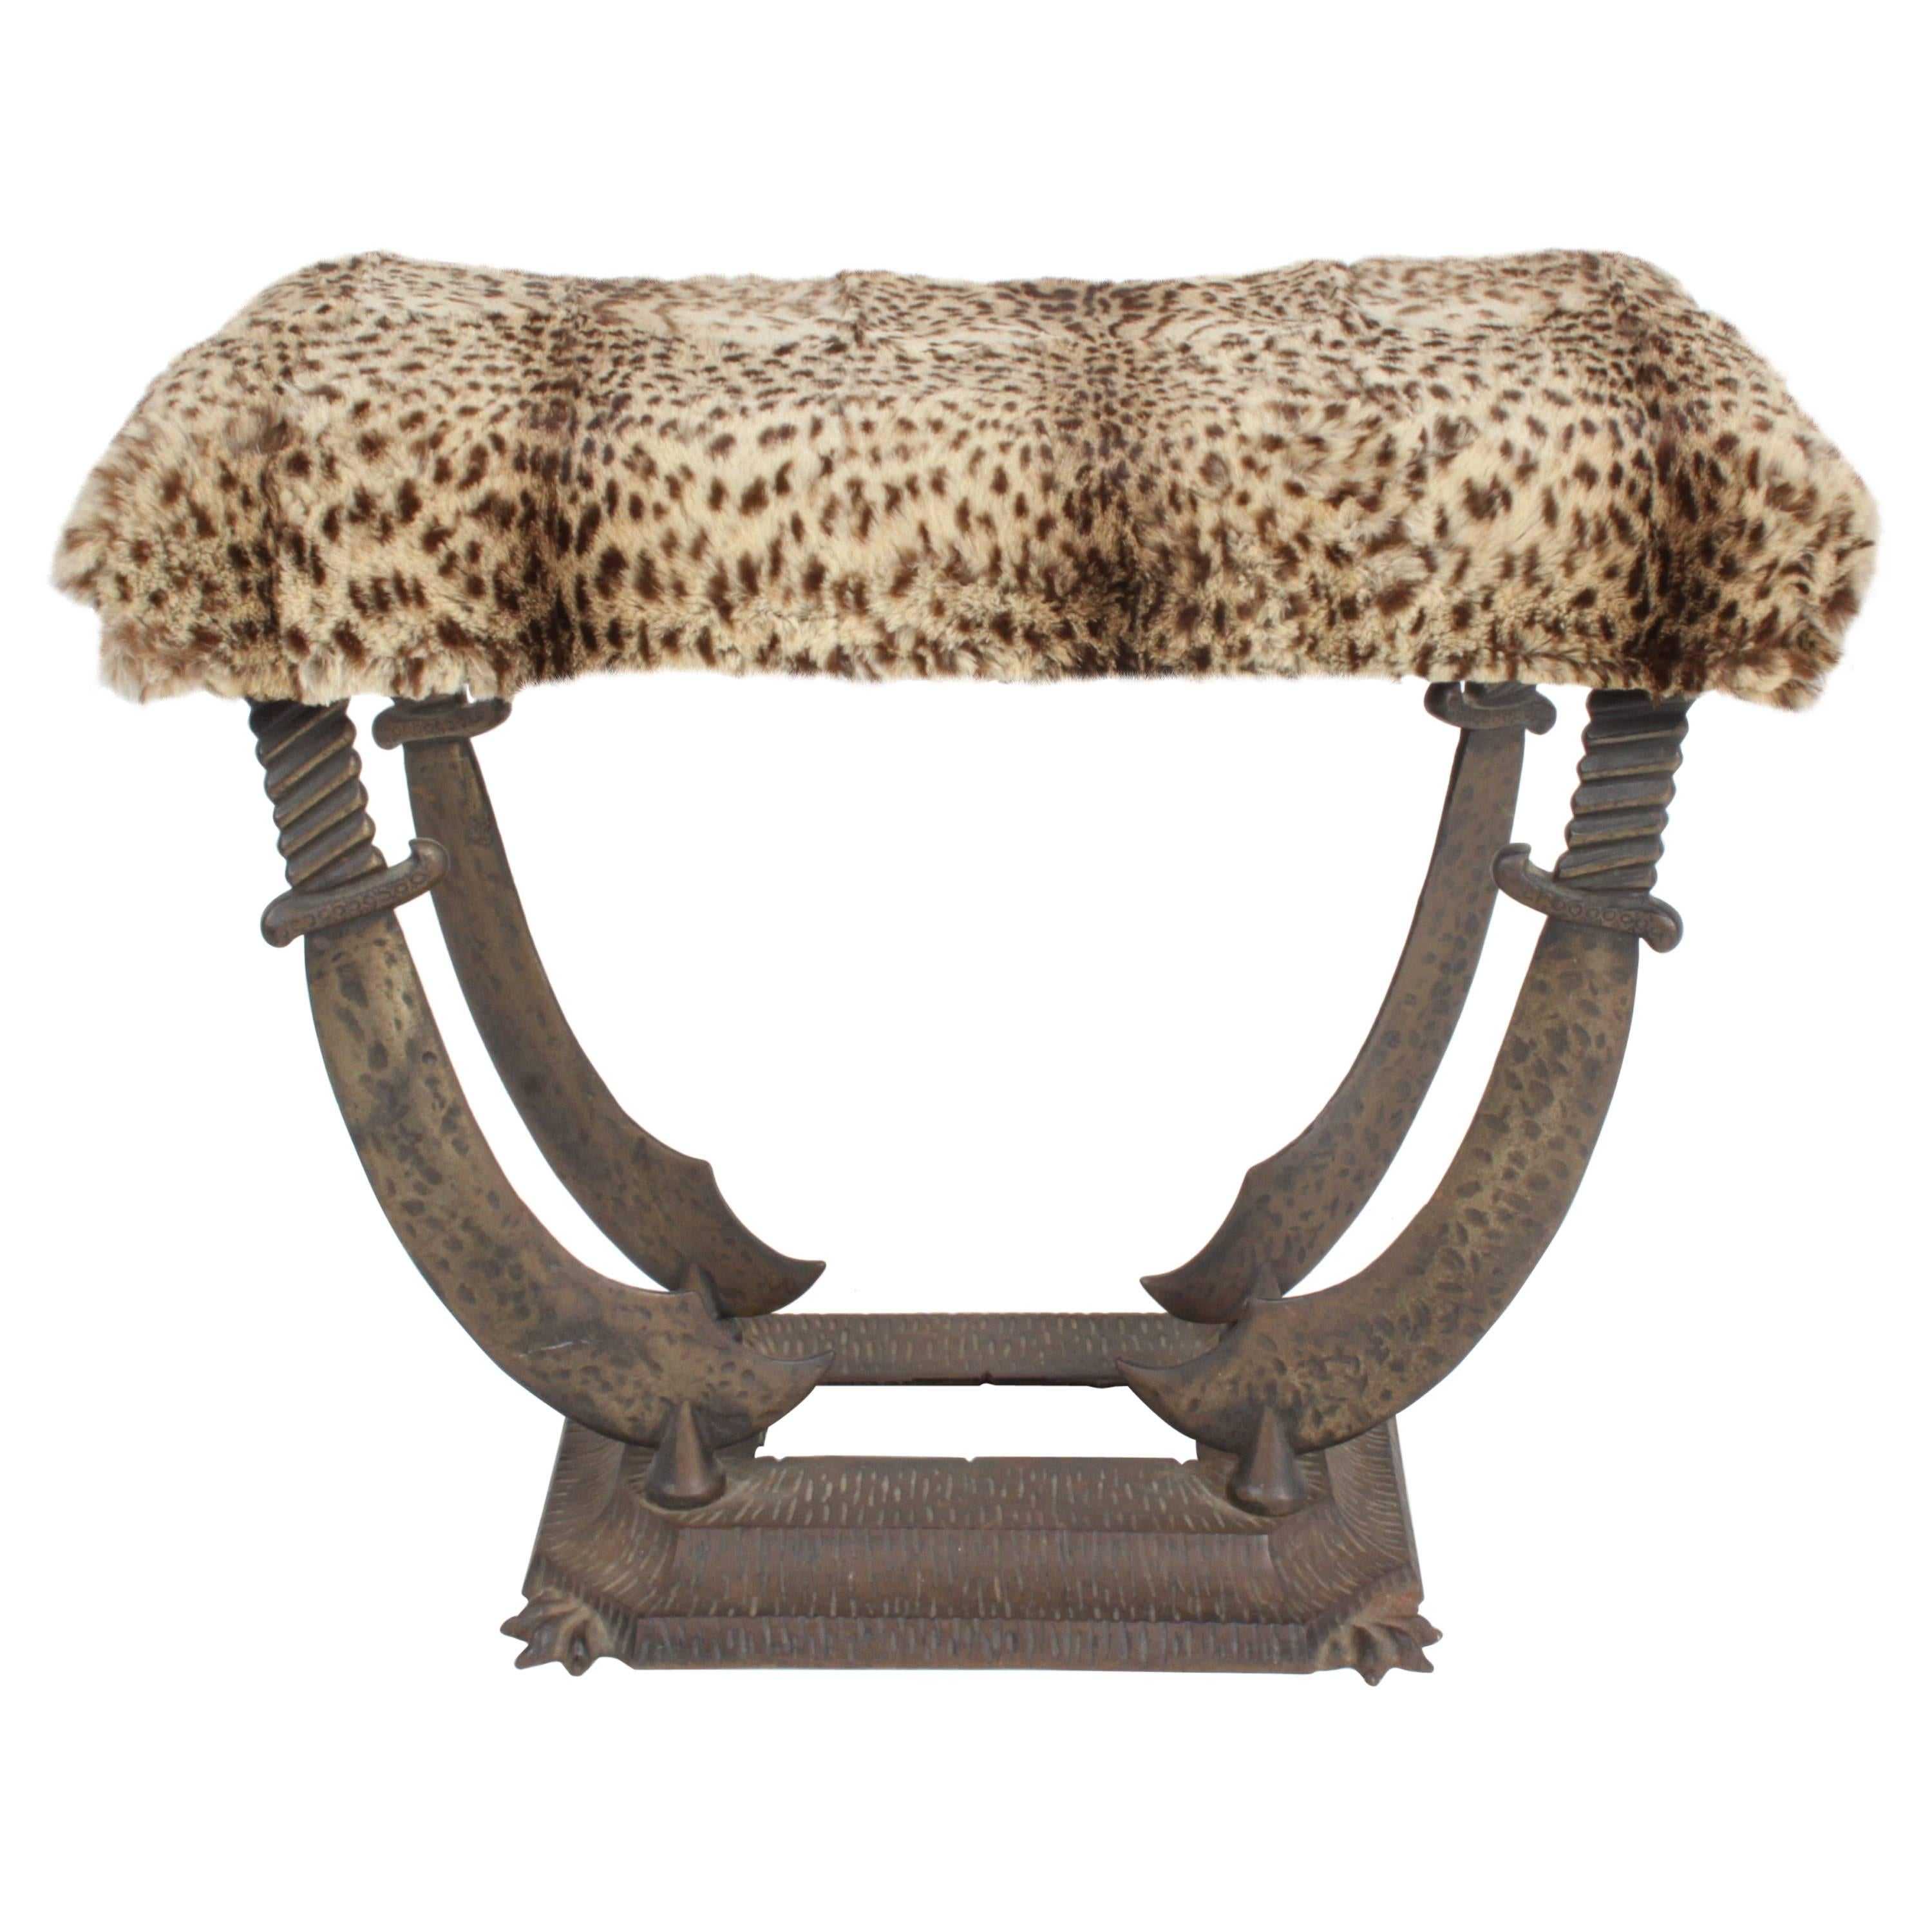 Art Deco Sabre Cast Iron Bench or Stool with Leopard Upholstery by Verona